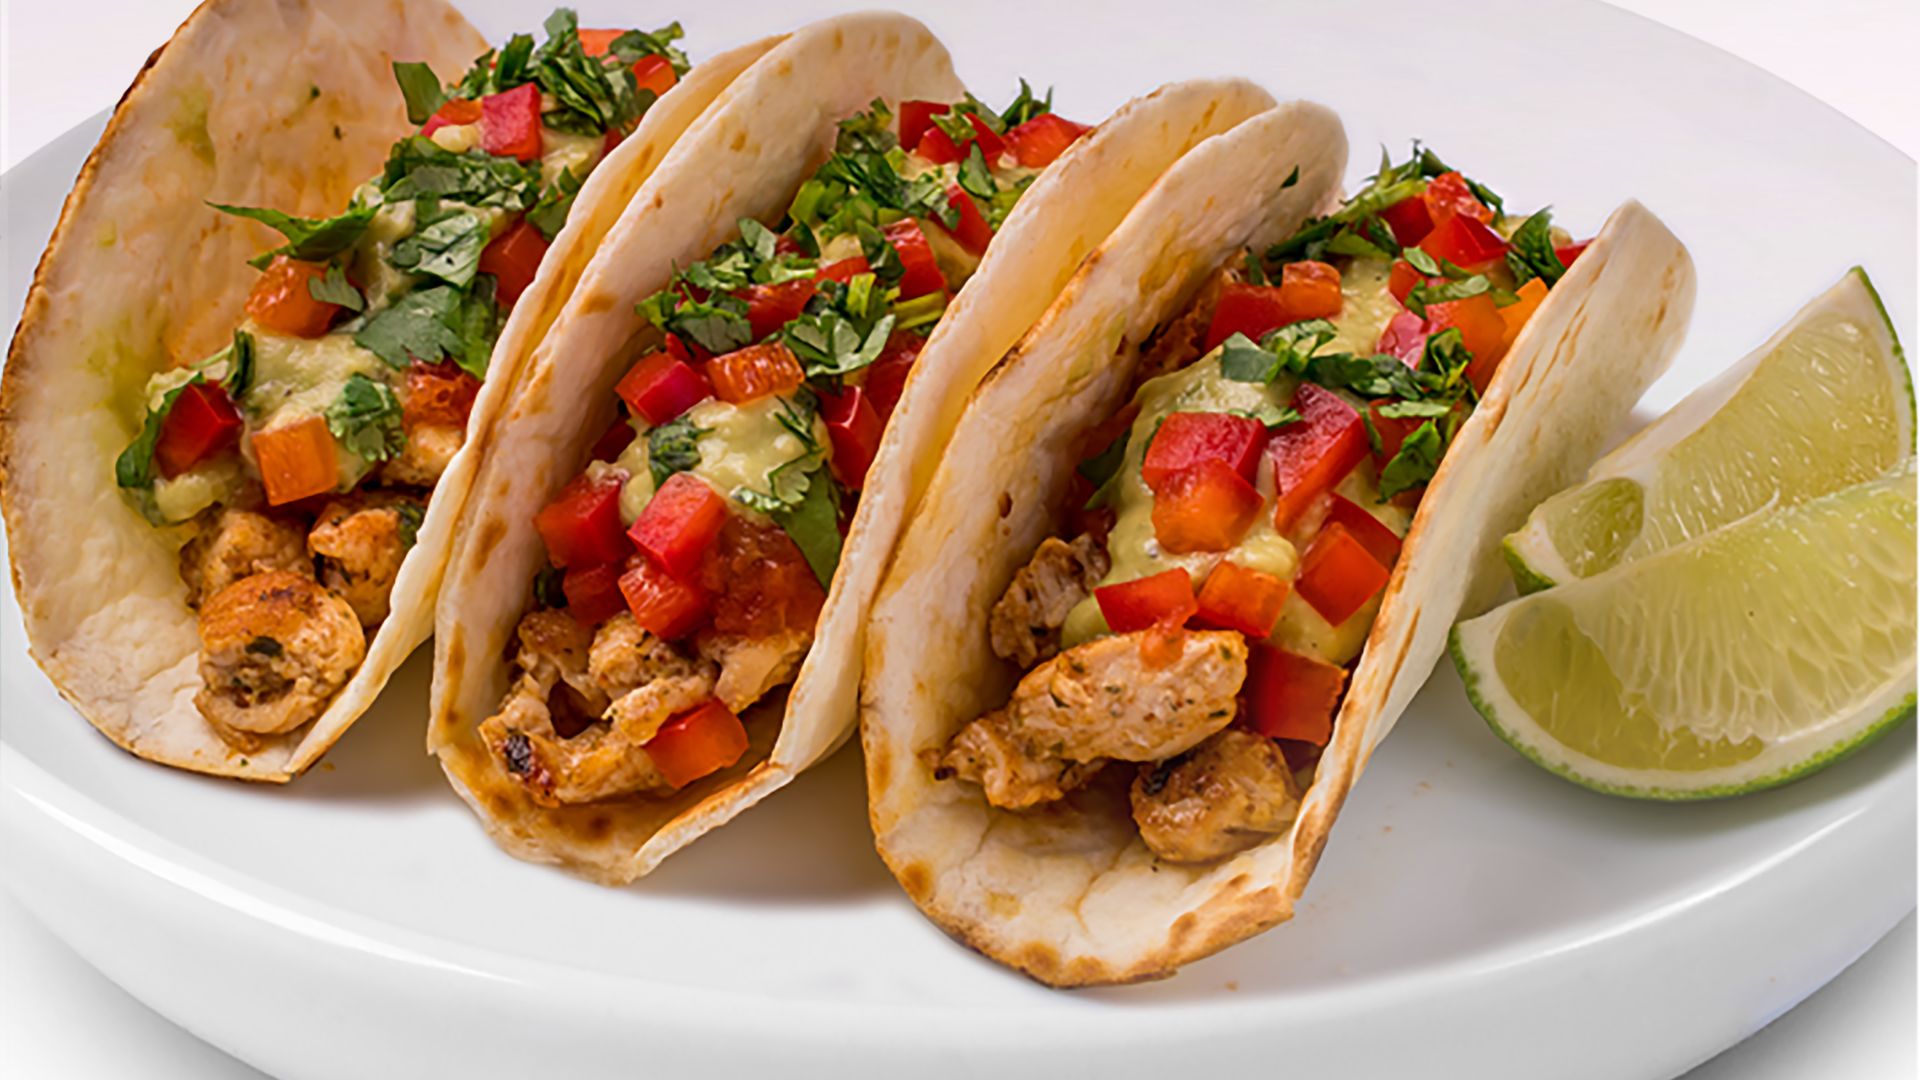 A Plate Of Tacos from Fiesta Taco at Morongo Casino Resort & Spa